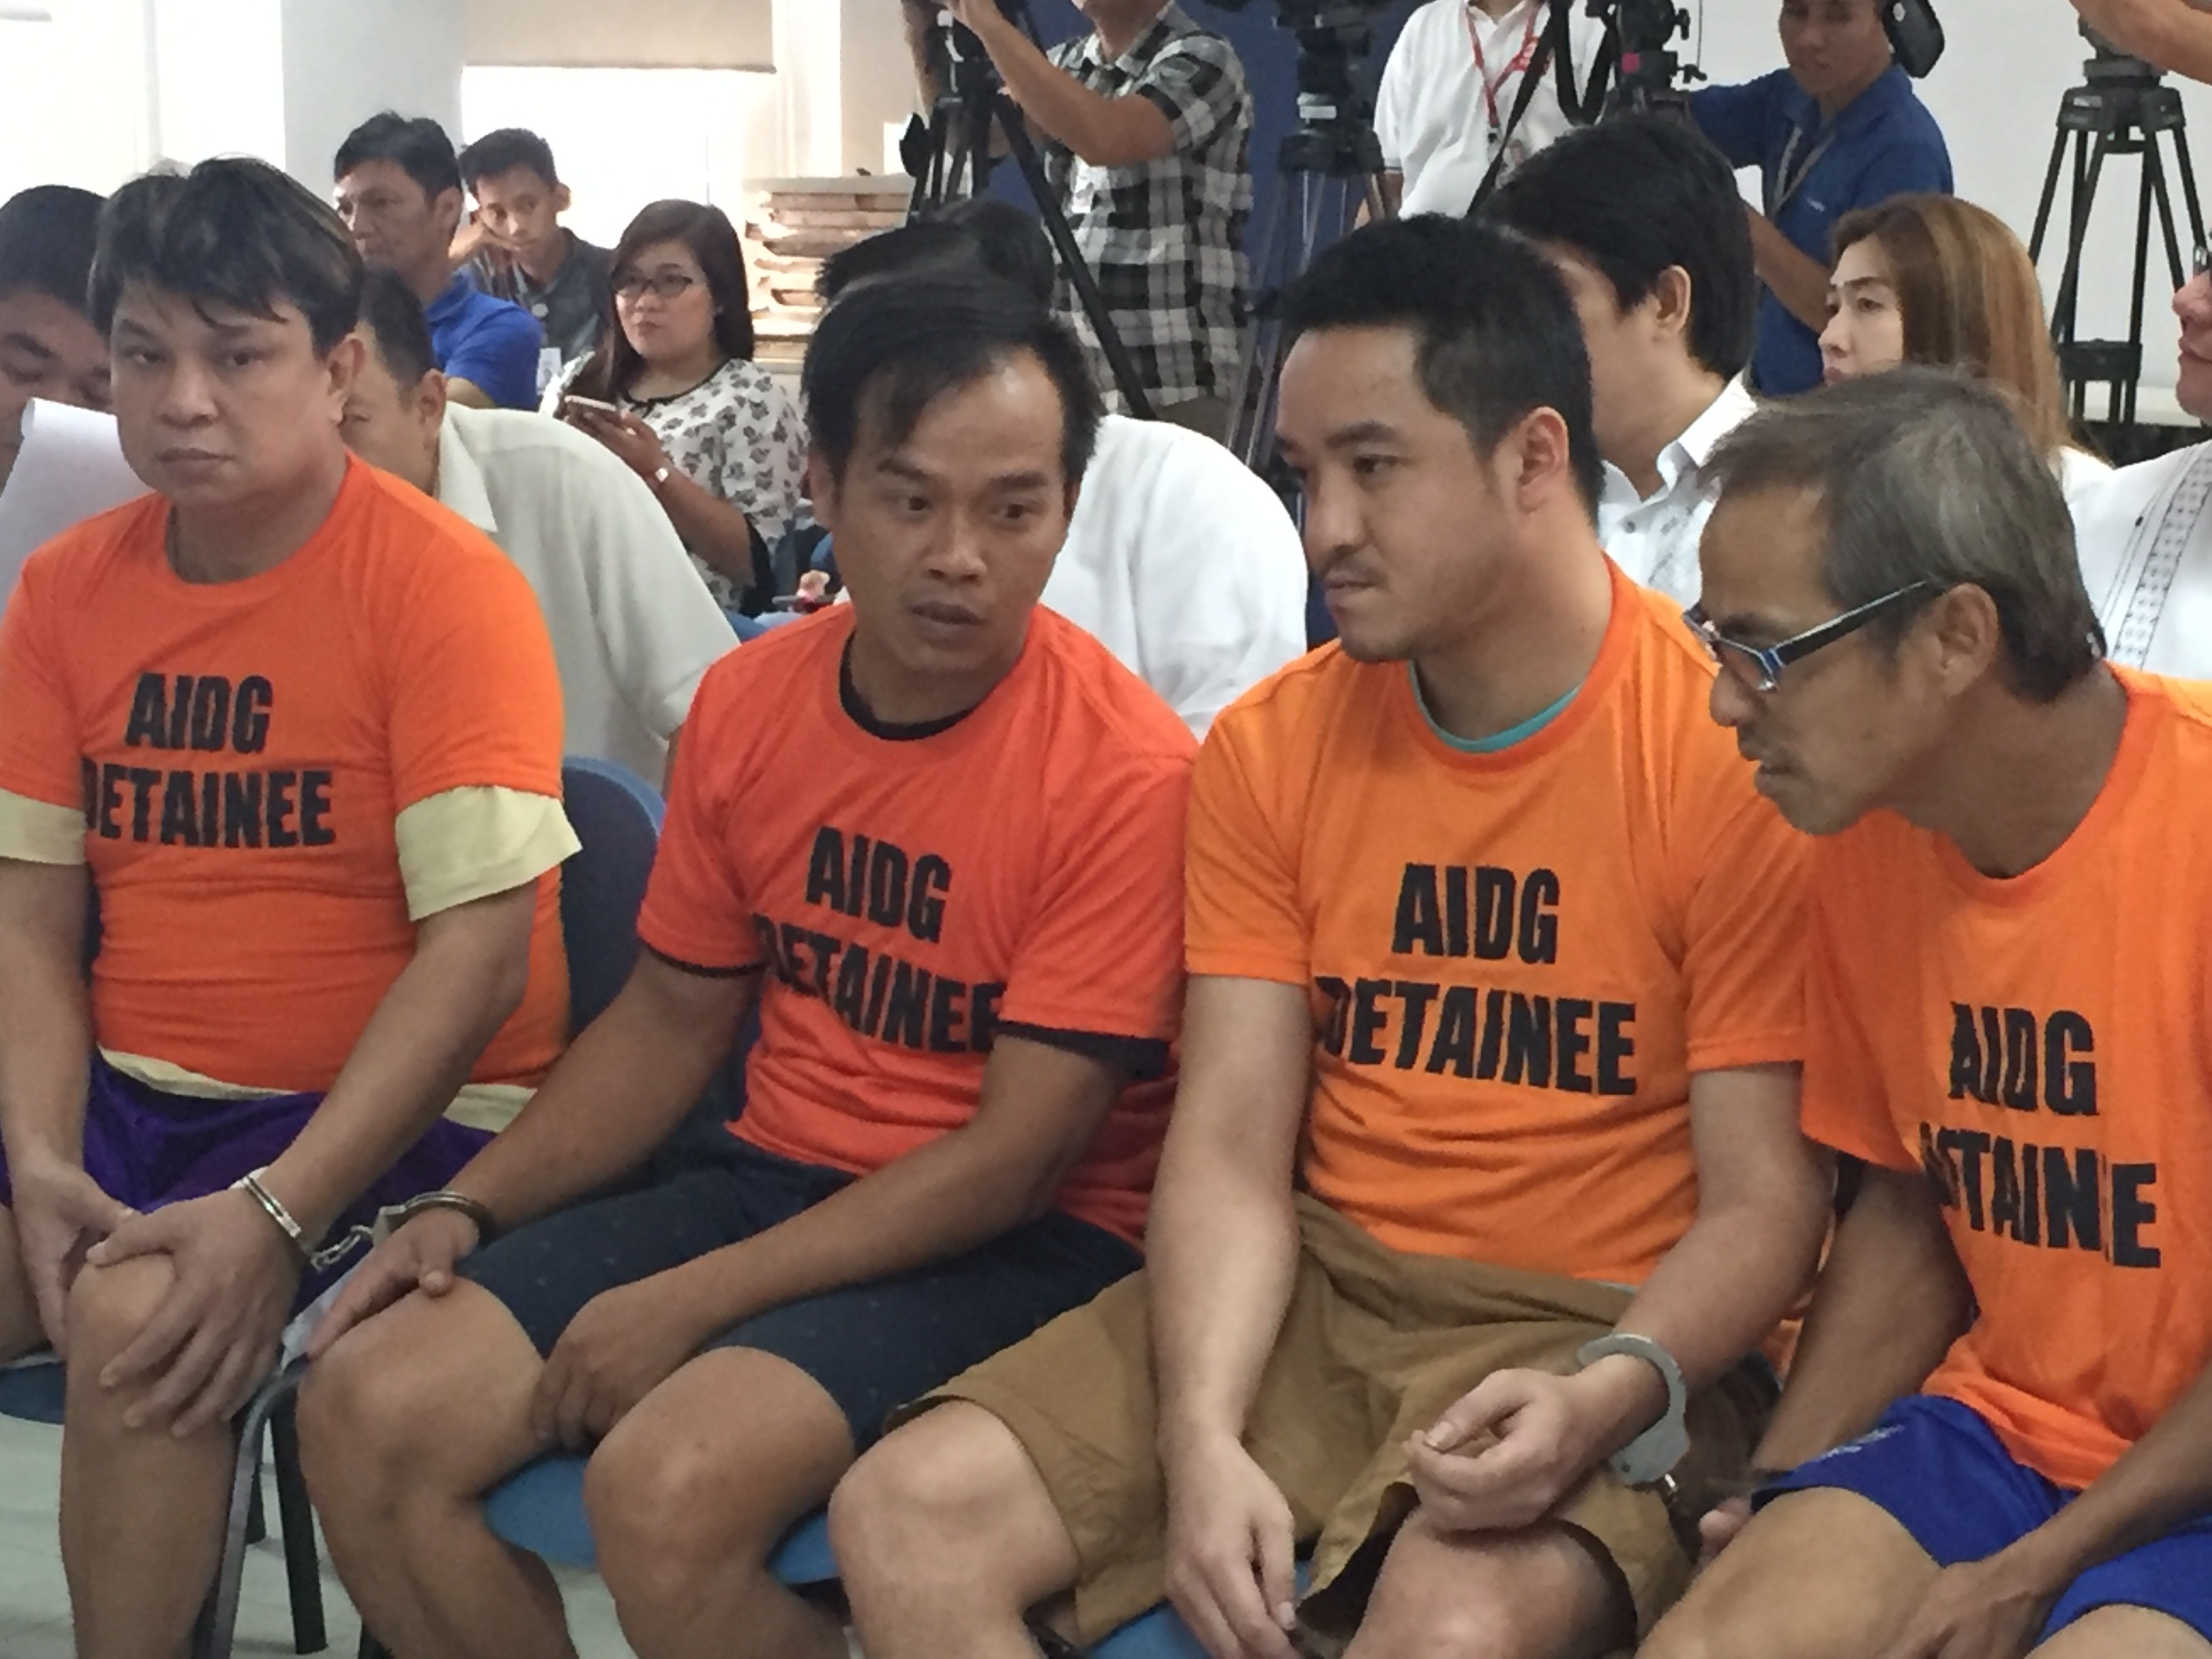 Palace: No special treatment for Chinese men convicted over drugs